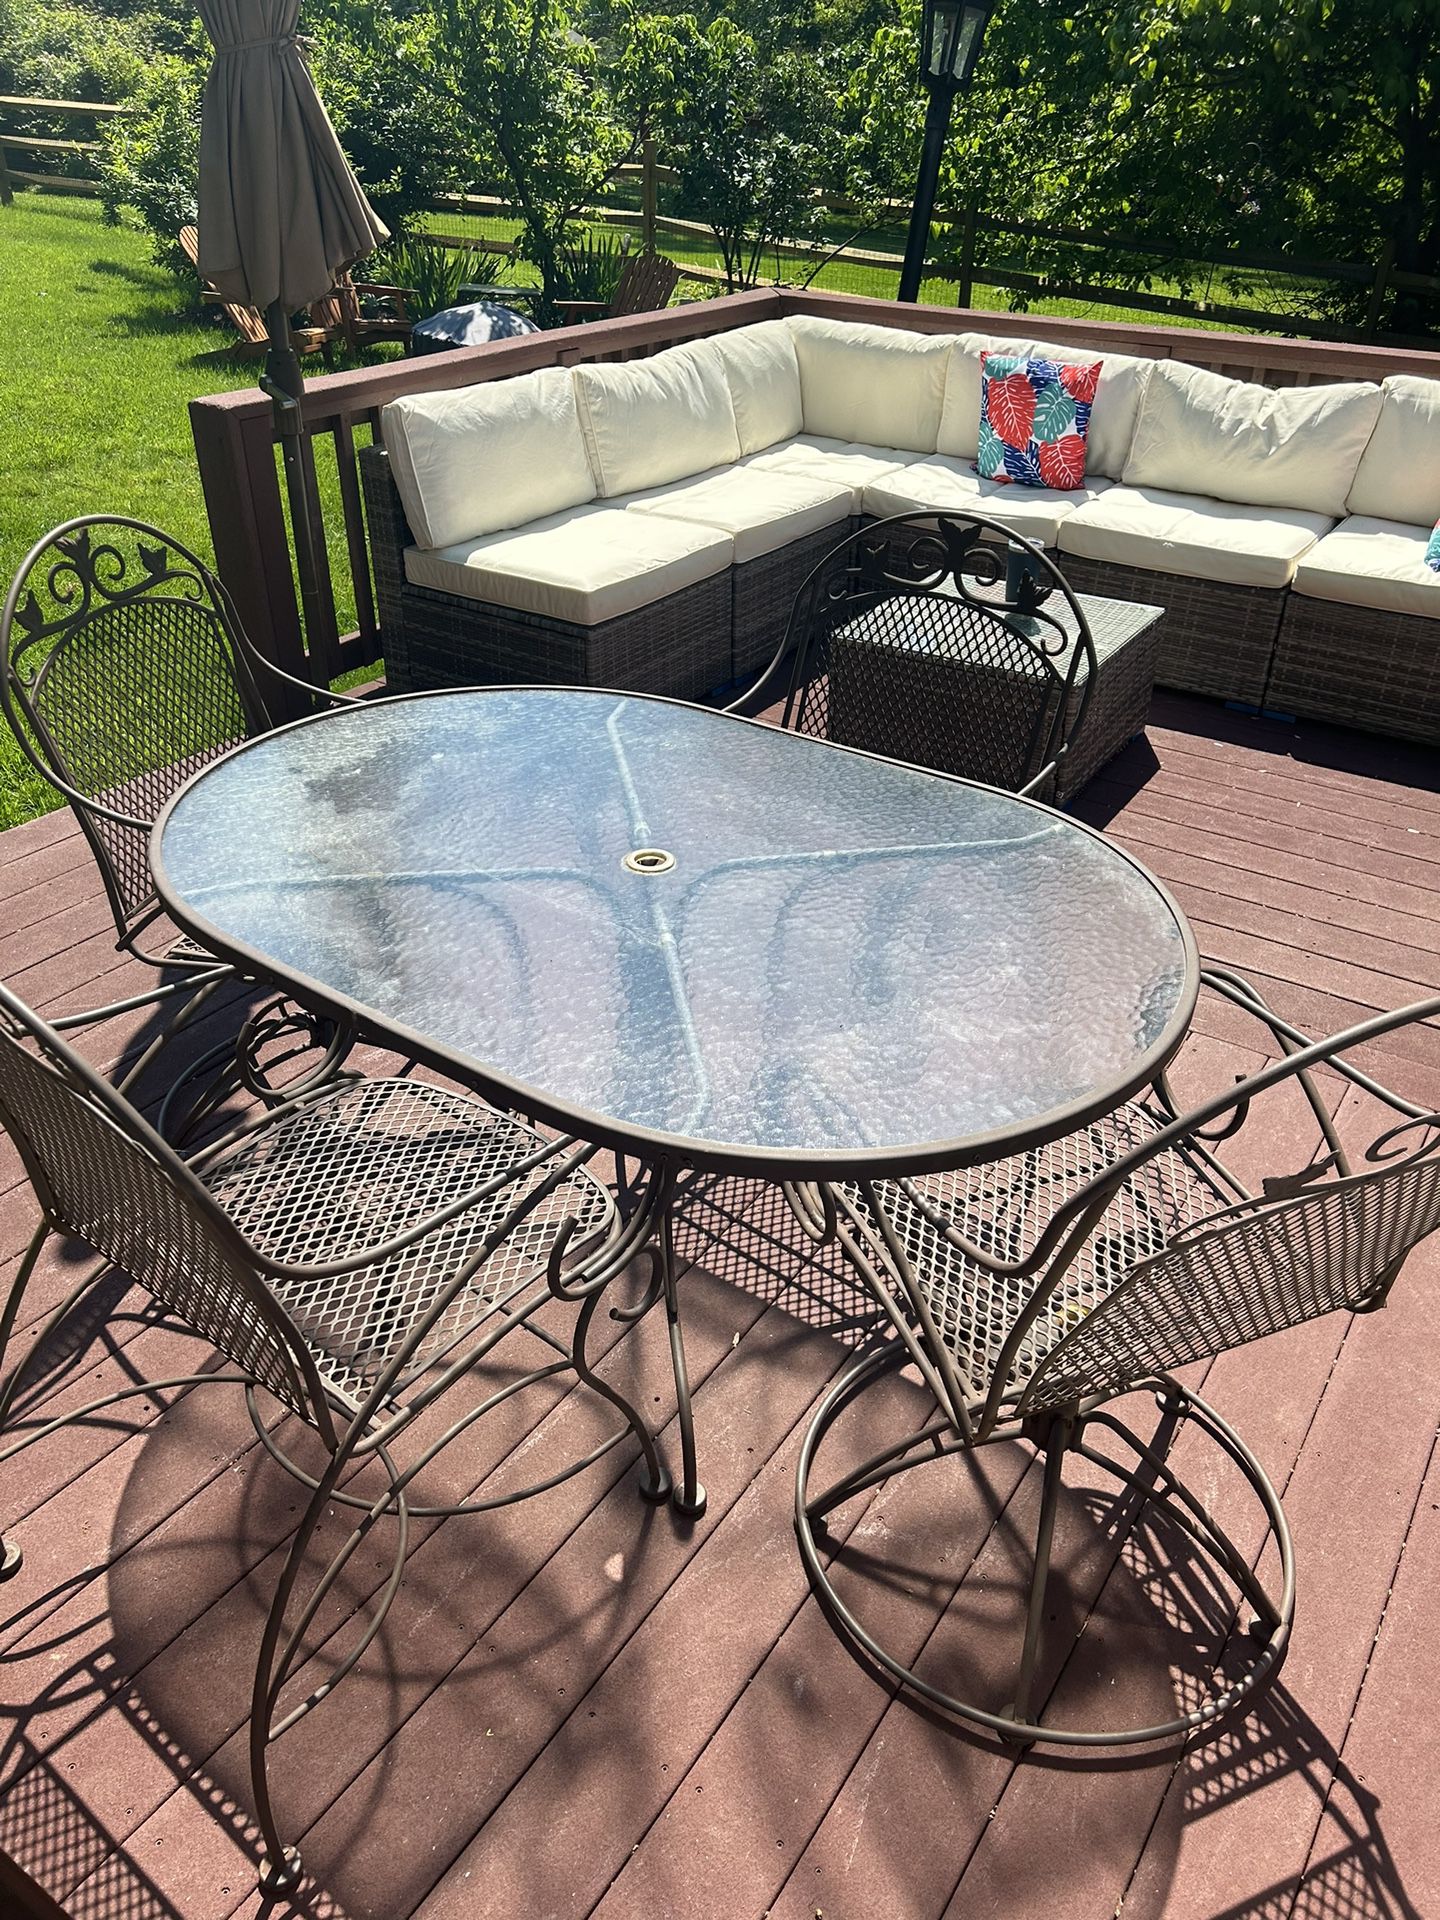 Wrought Iron Patio Outdoor Table And Chairs